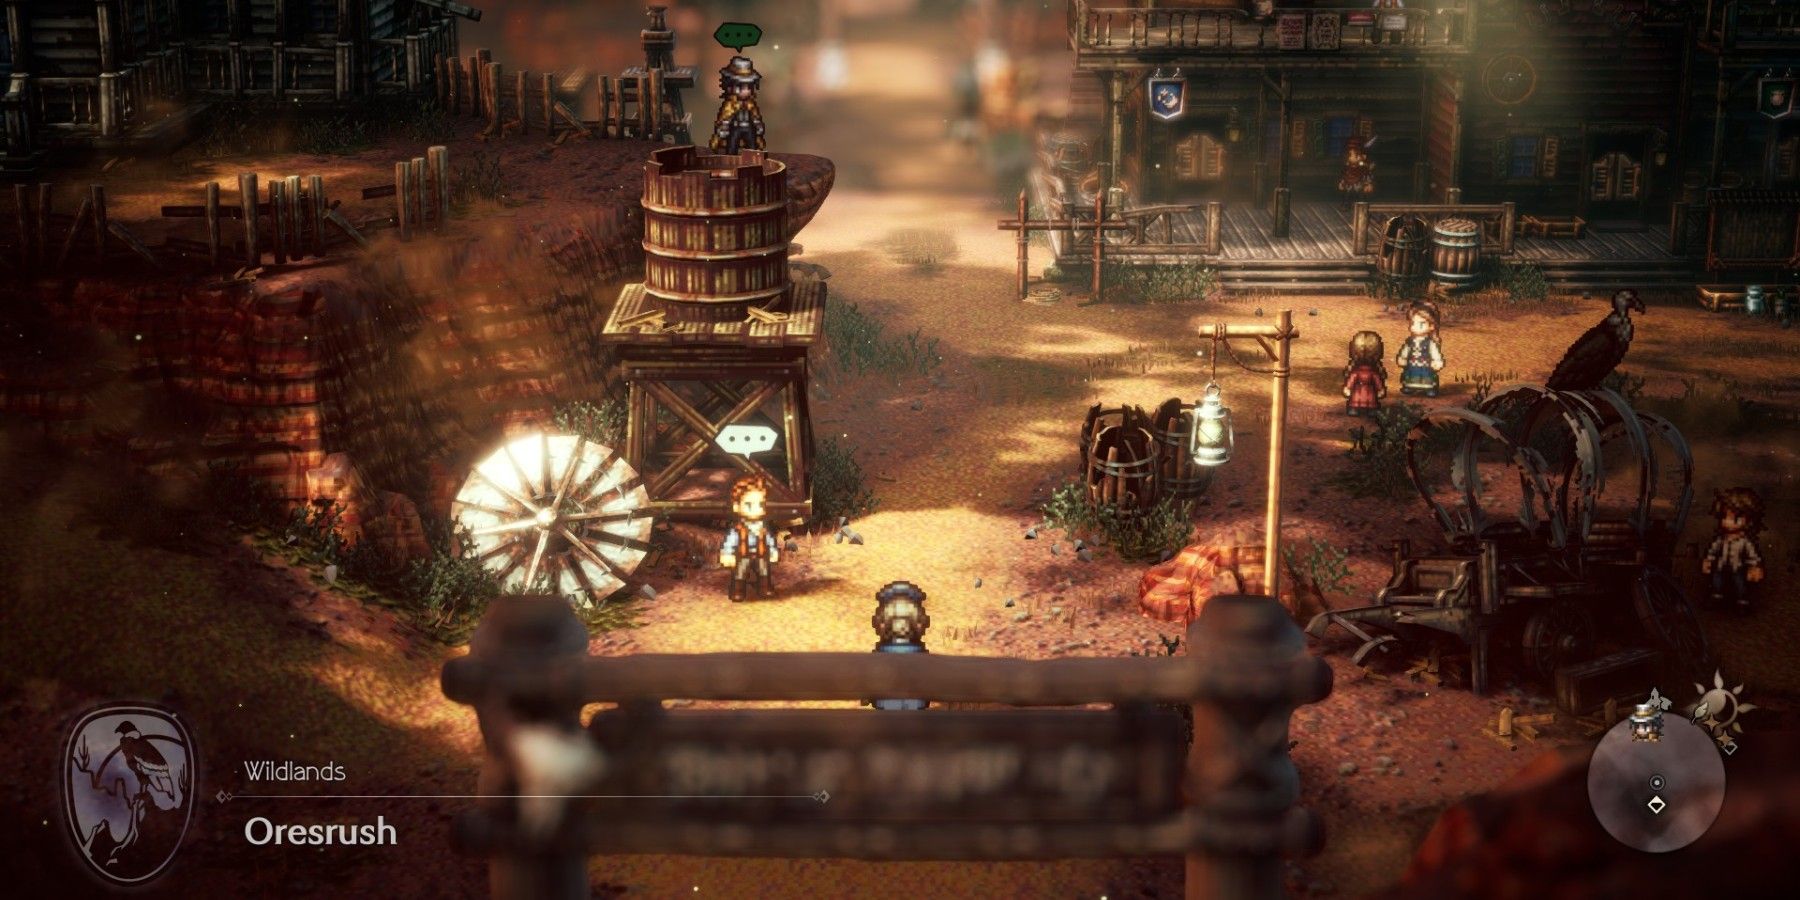 Octopath Traveler 2: Every Oresrush Side Story Solution